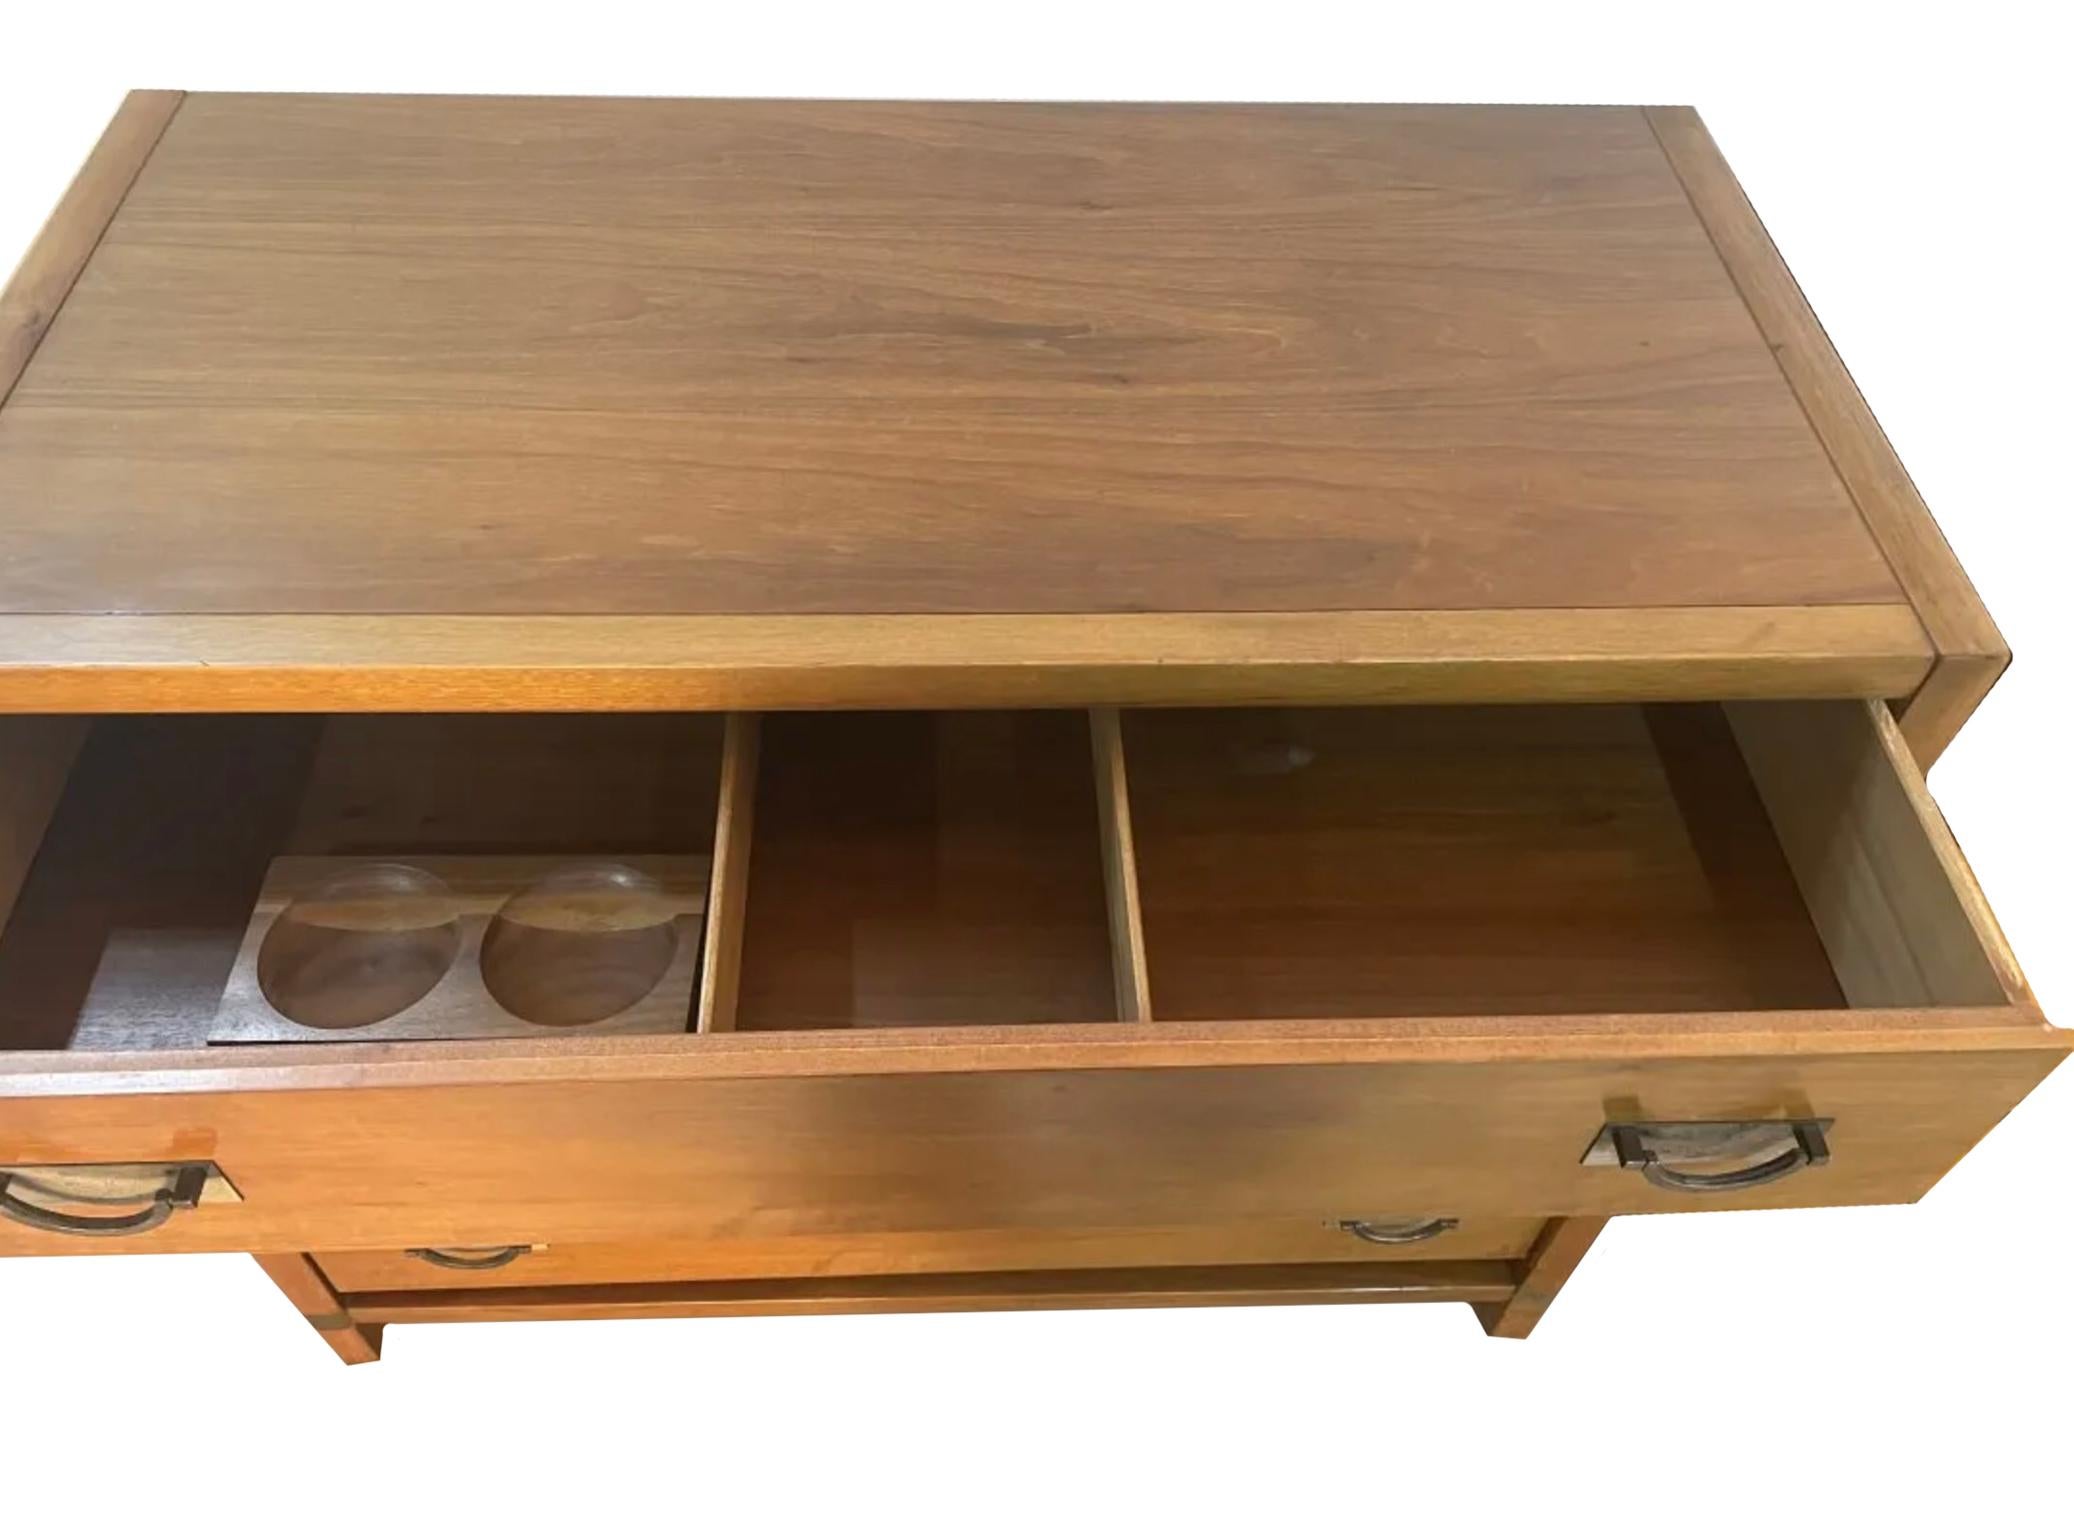 Woodwork Pair of Mid Century Modern Walnut 4 drawer Dressers with Nickel pull handles  For Sale